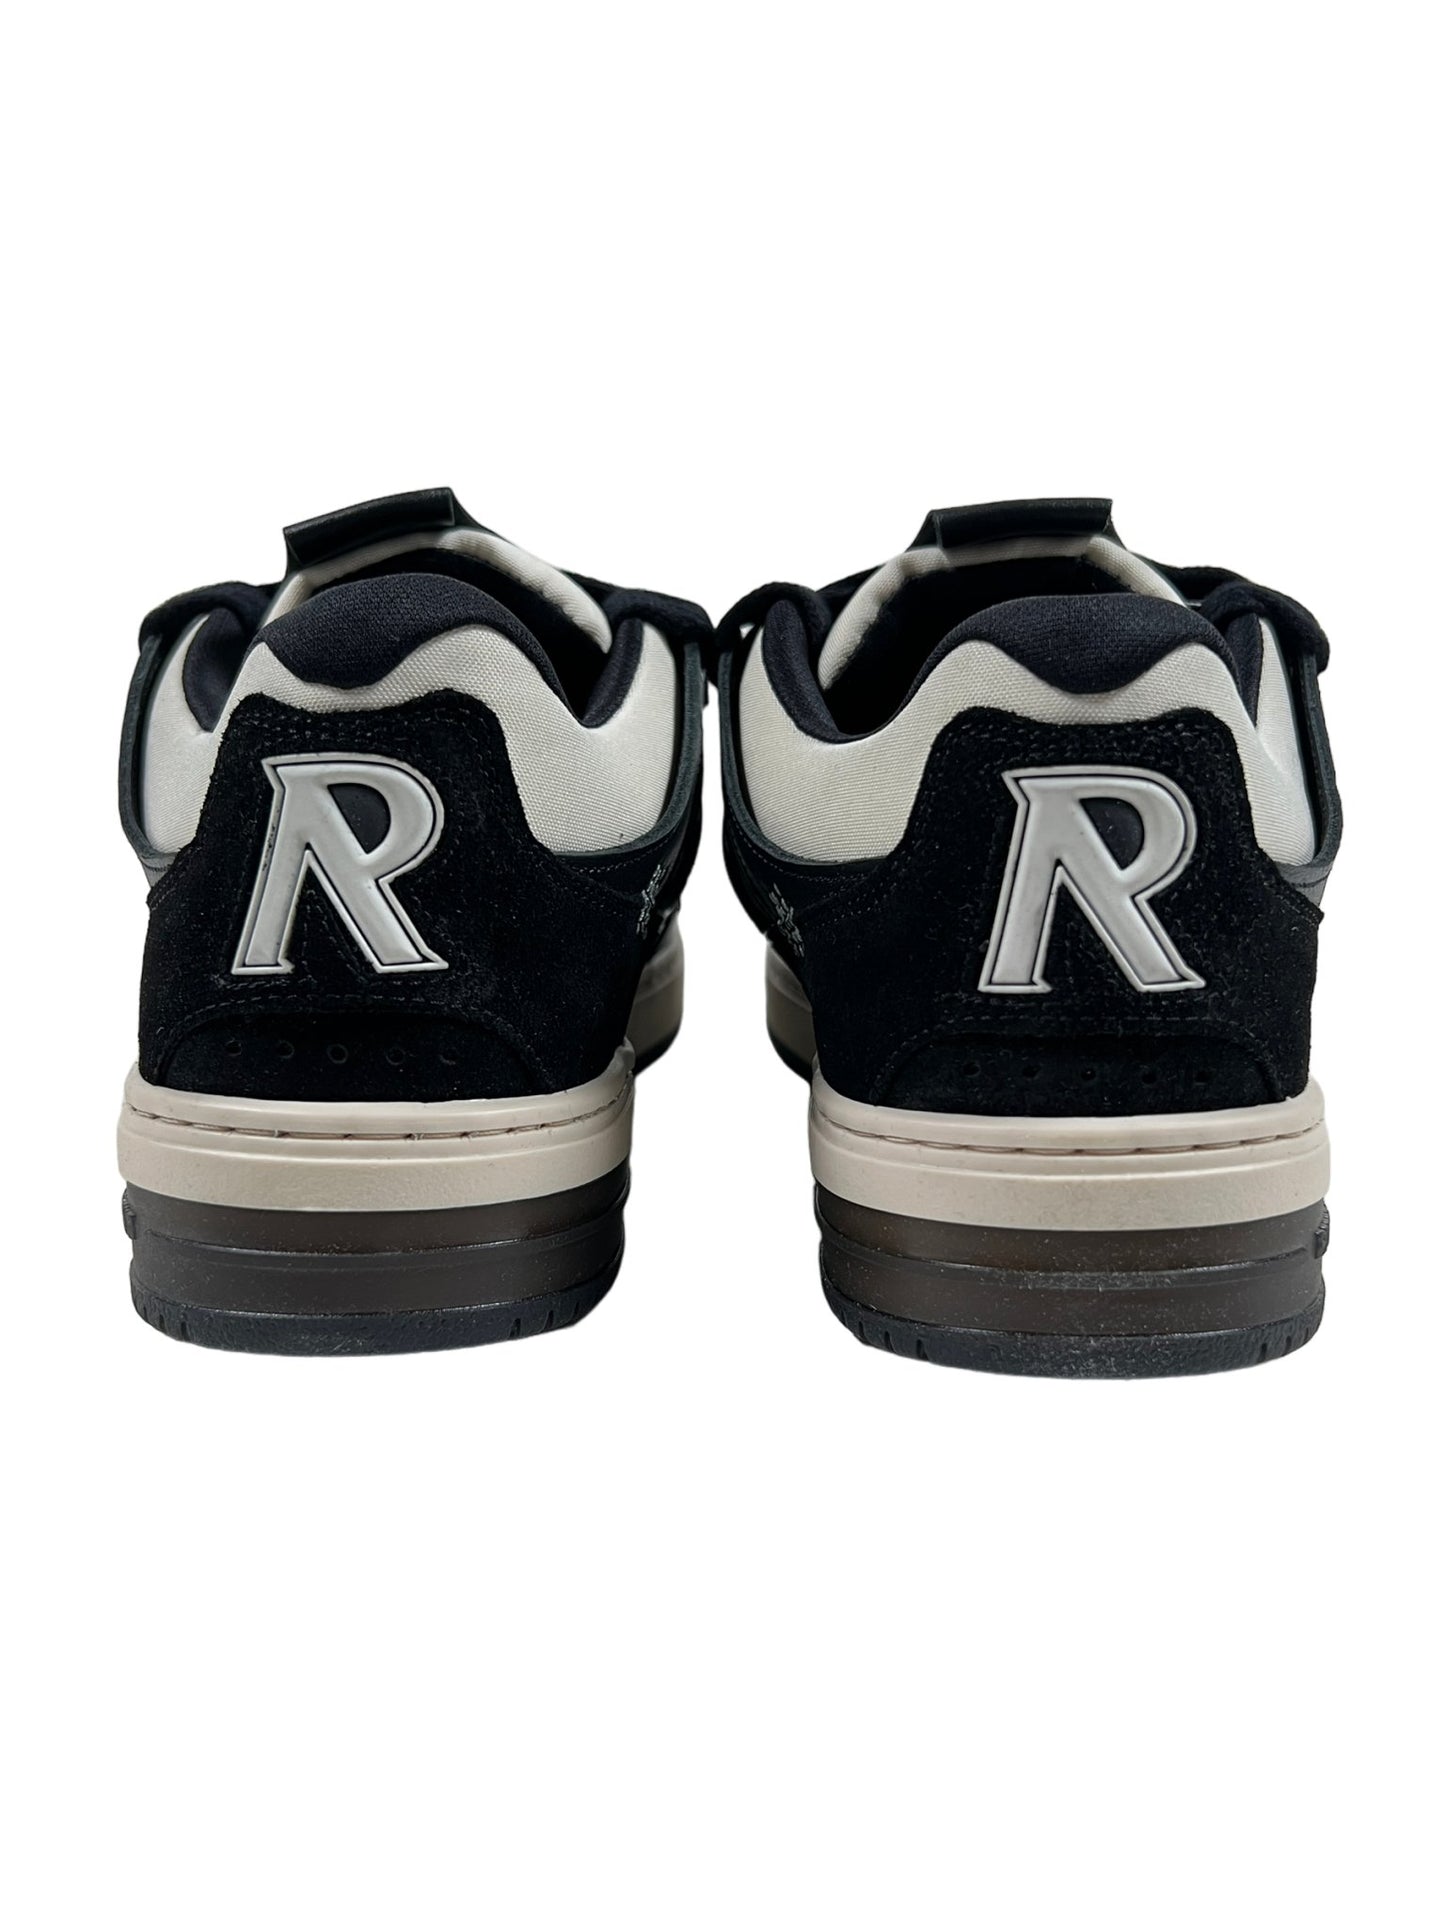 Rear view of a pair of REPRESENT black vintage white sneakers with a white and gray trim, featuring a bold "r" on each heel.